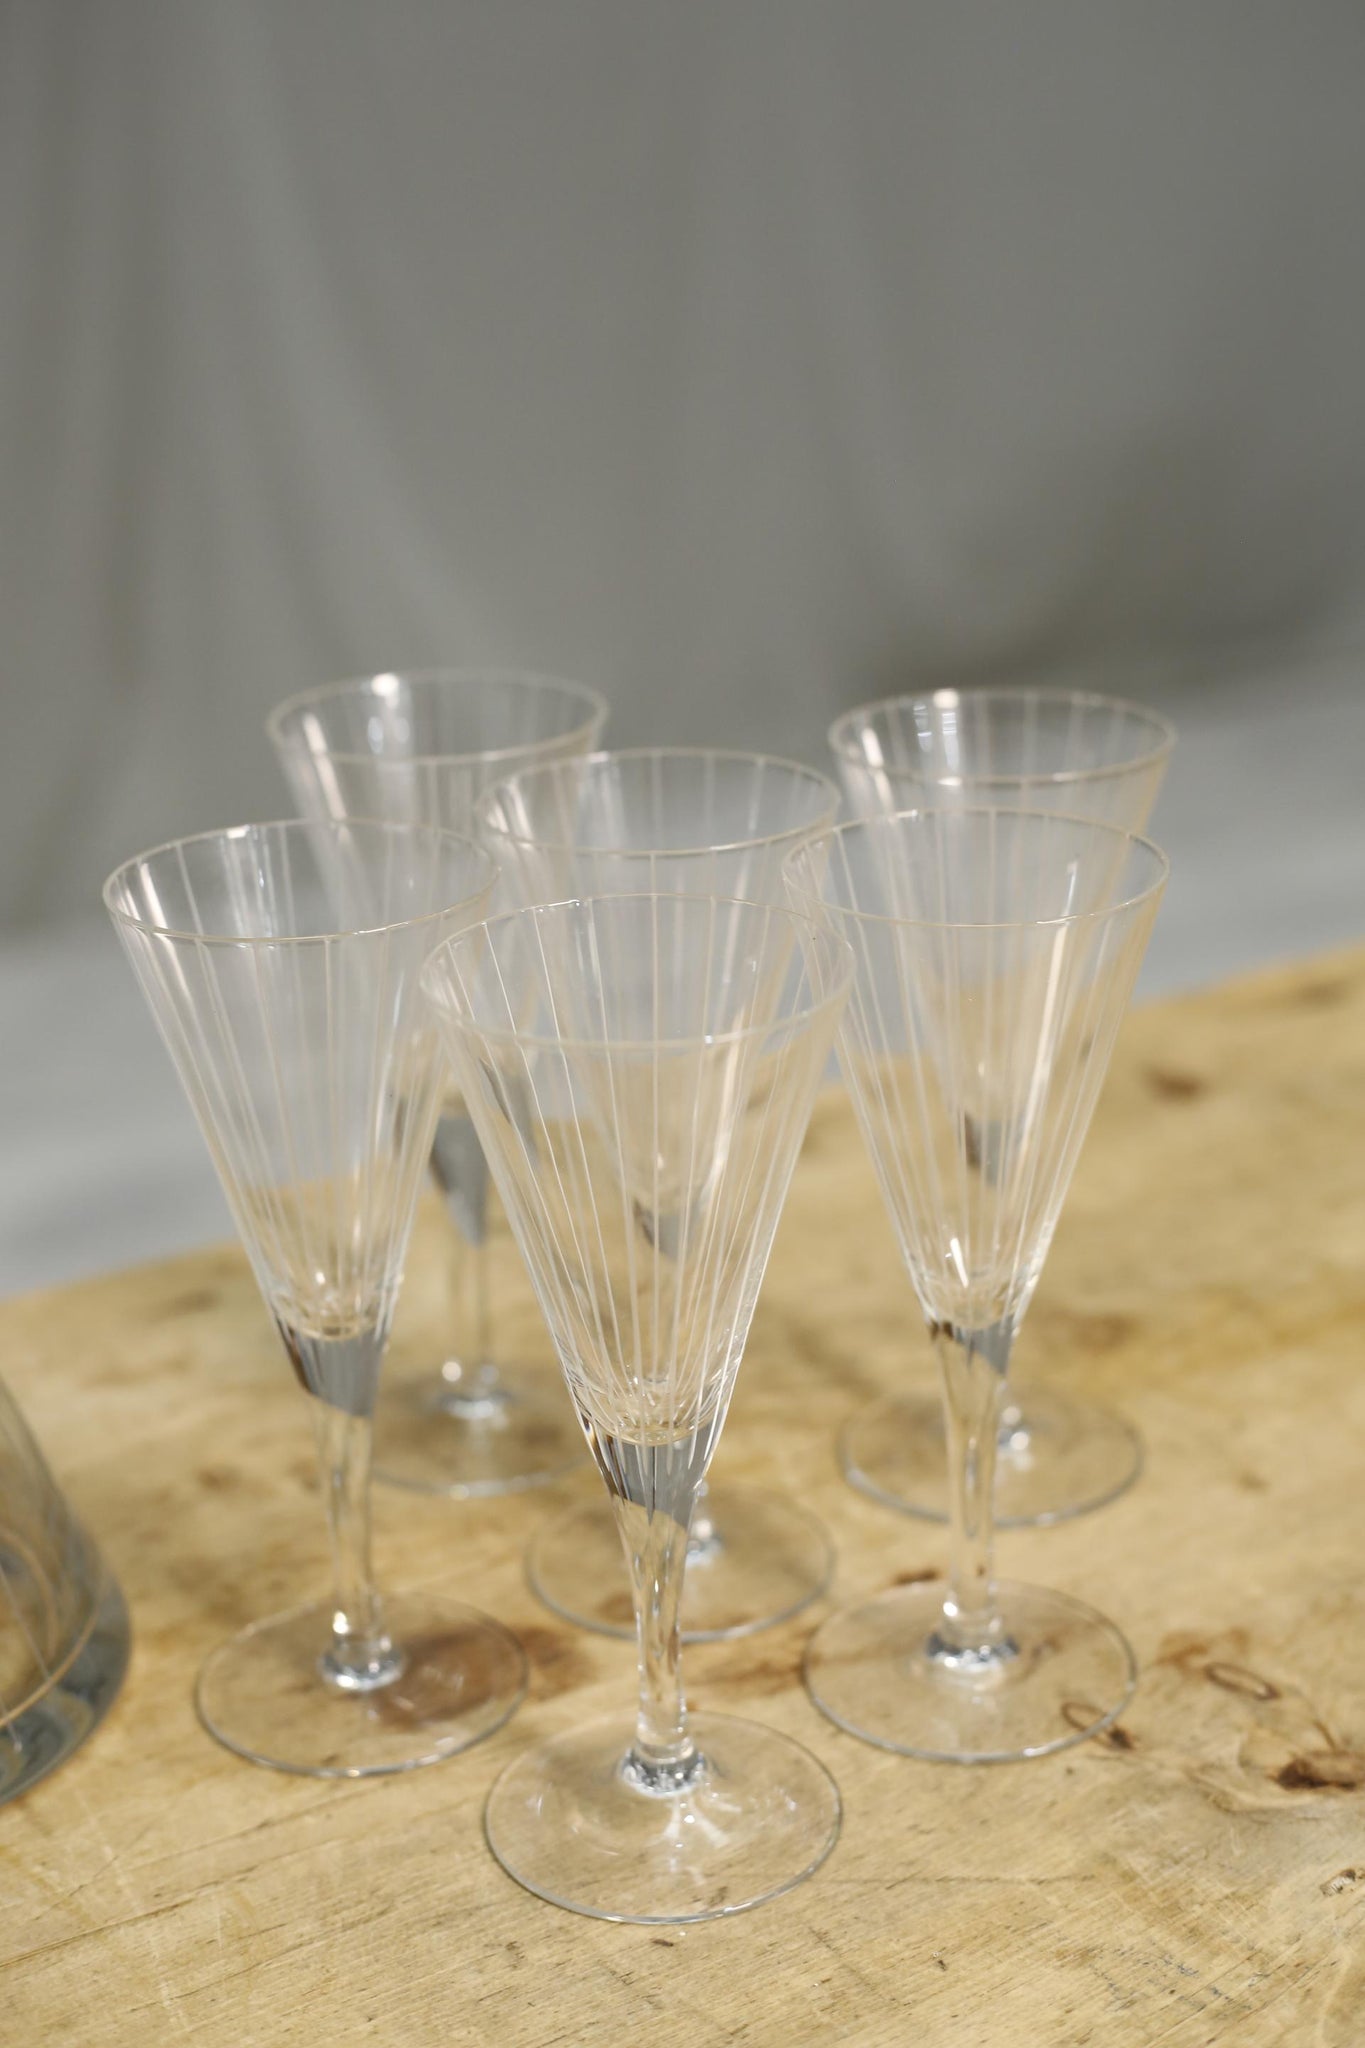 1950's vintage glass decanter and glasses set